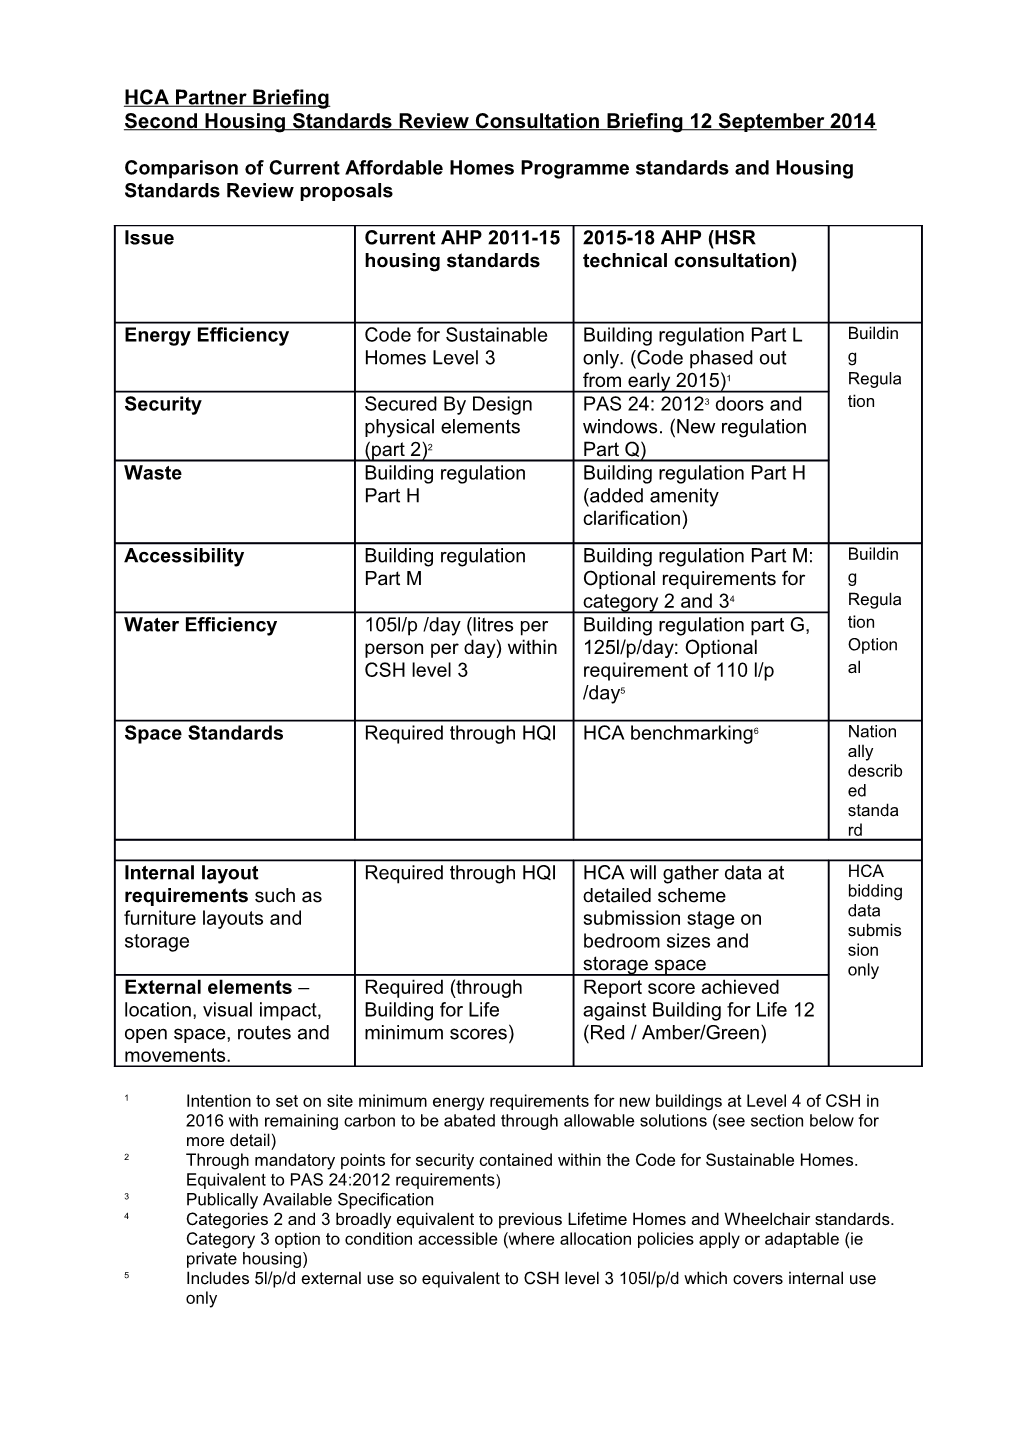 Comparison of Current Affordable Homes Programme Standards and Housing Standards Review